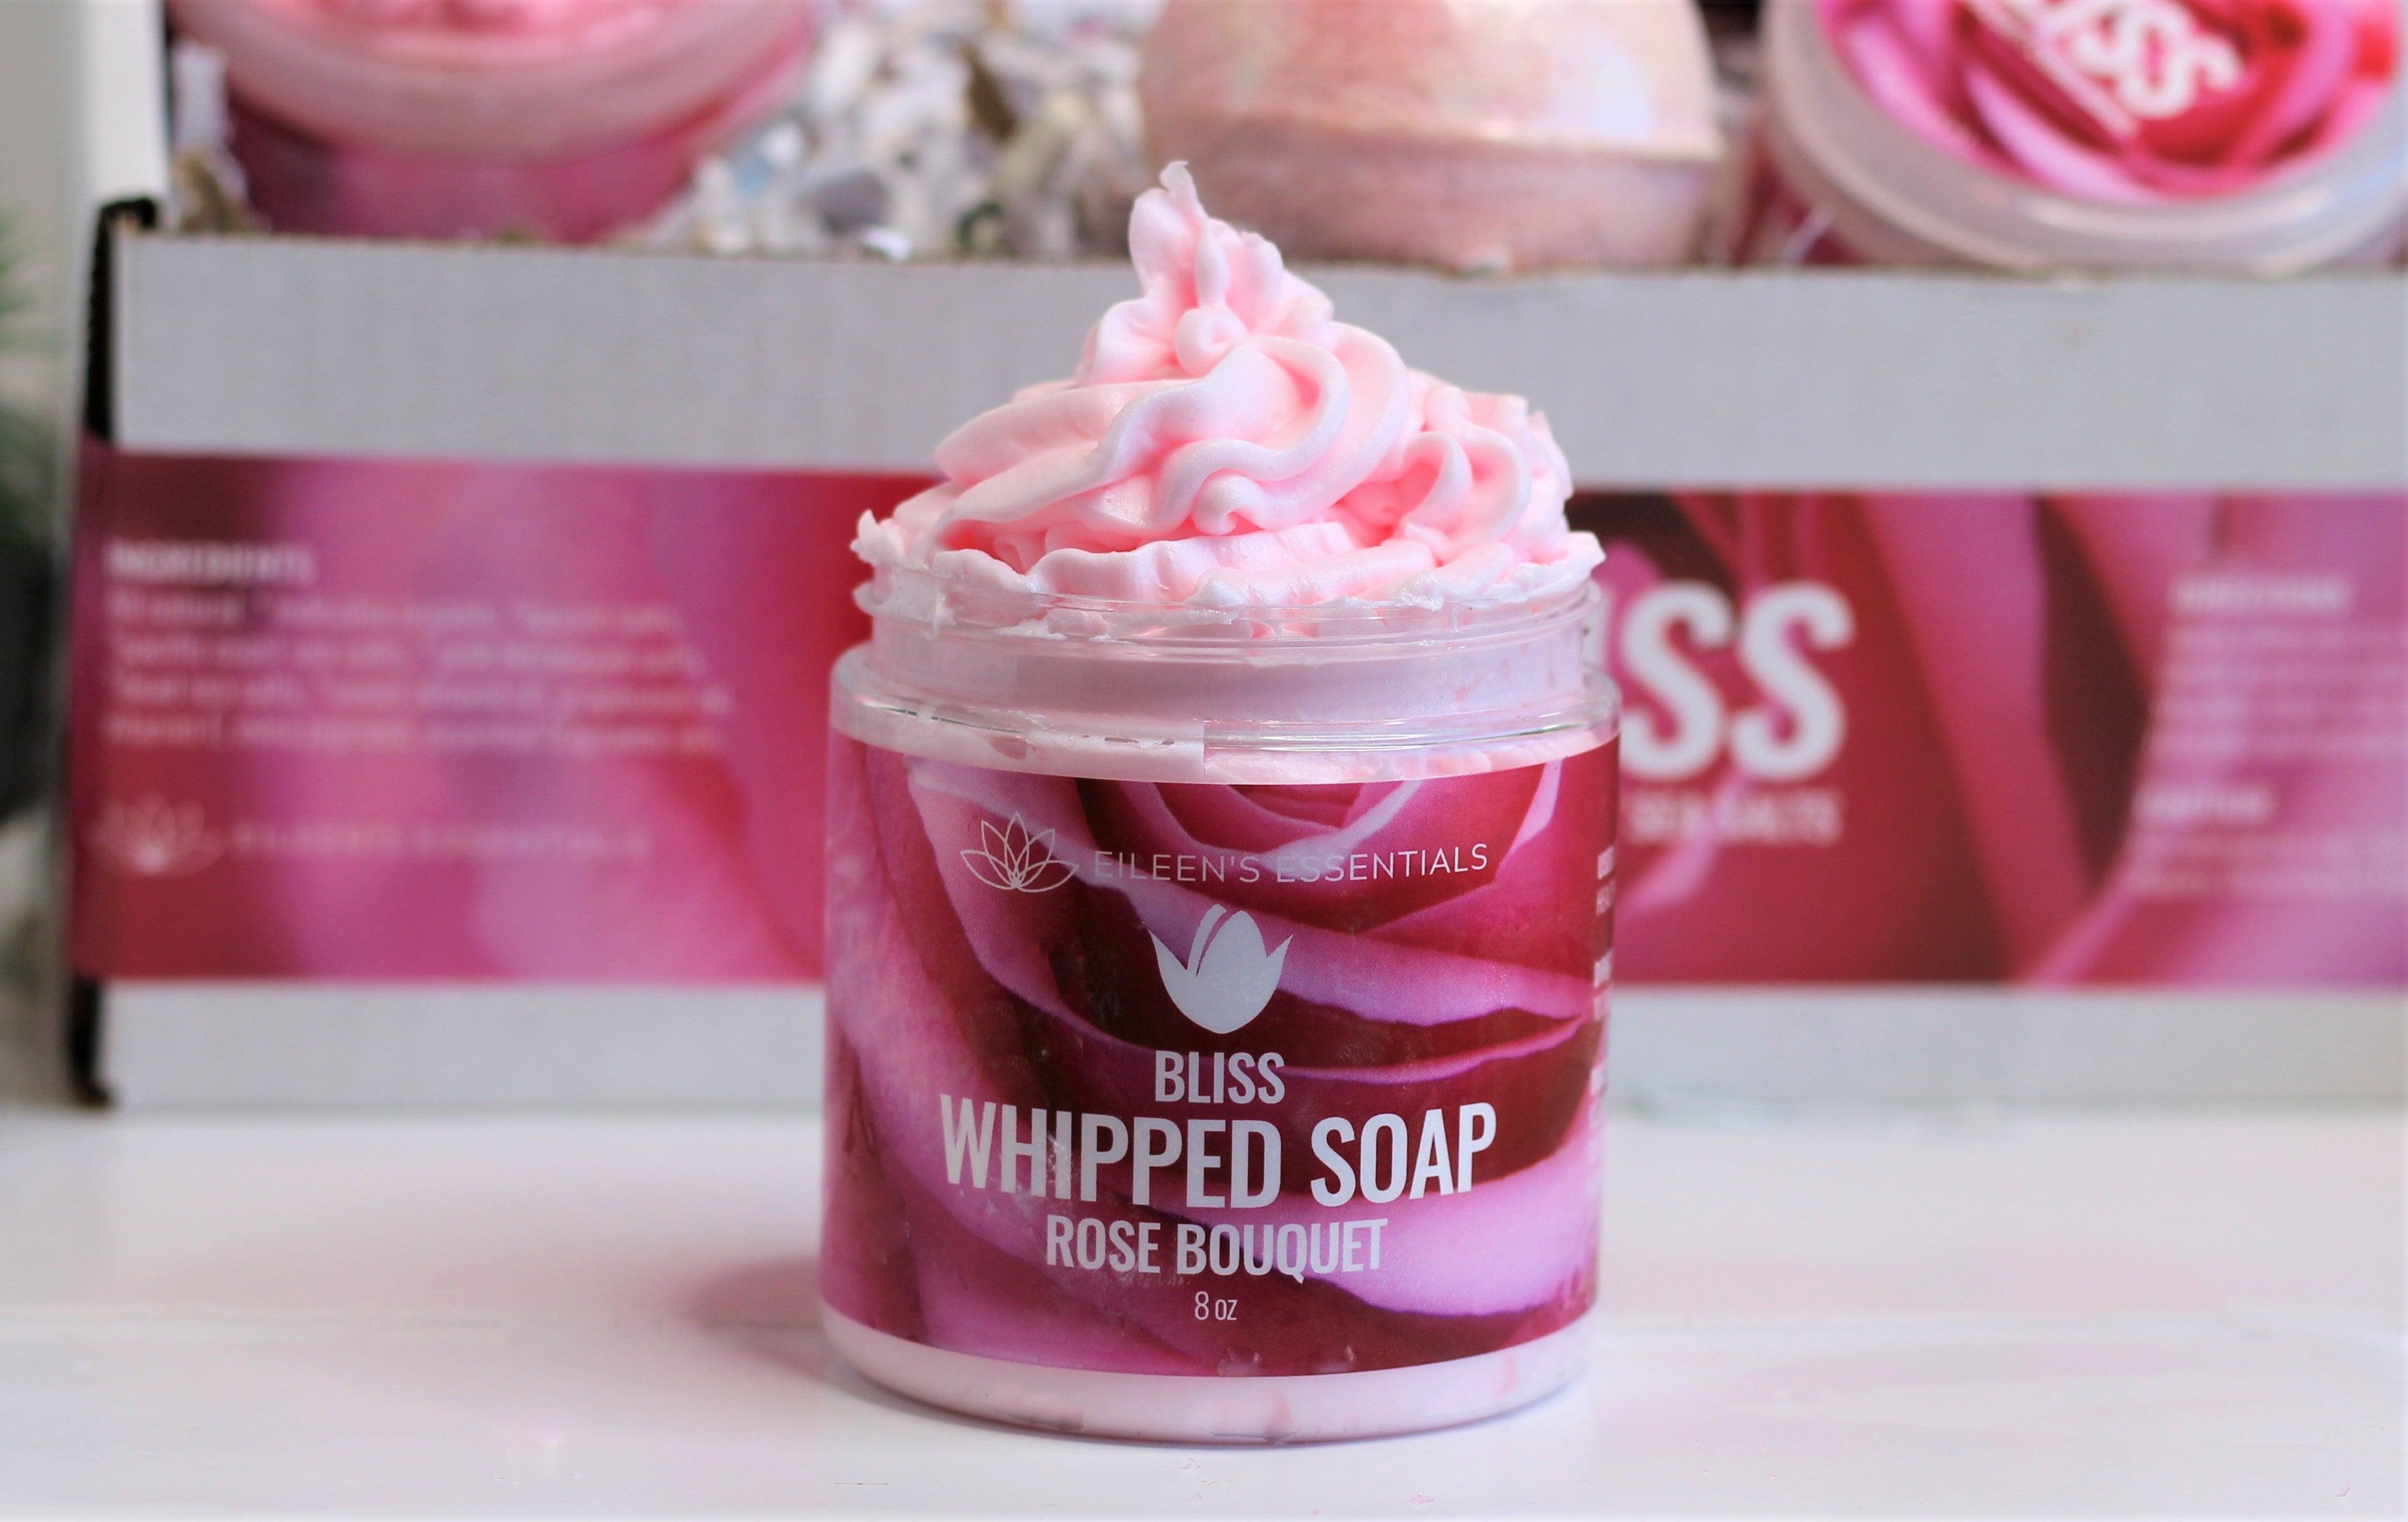 Whipped Soap; BLISS (Rose Bouquet)